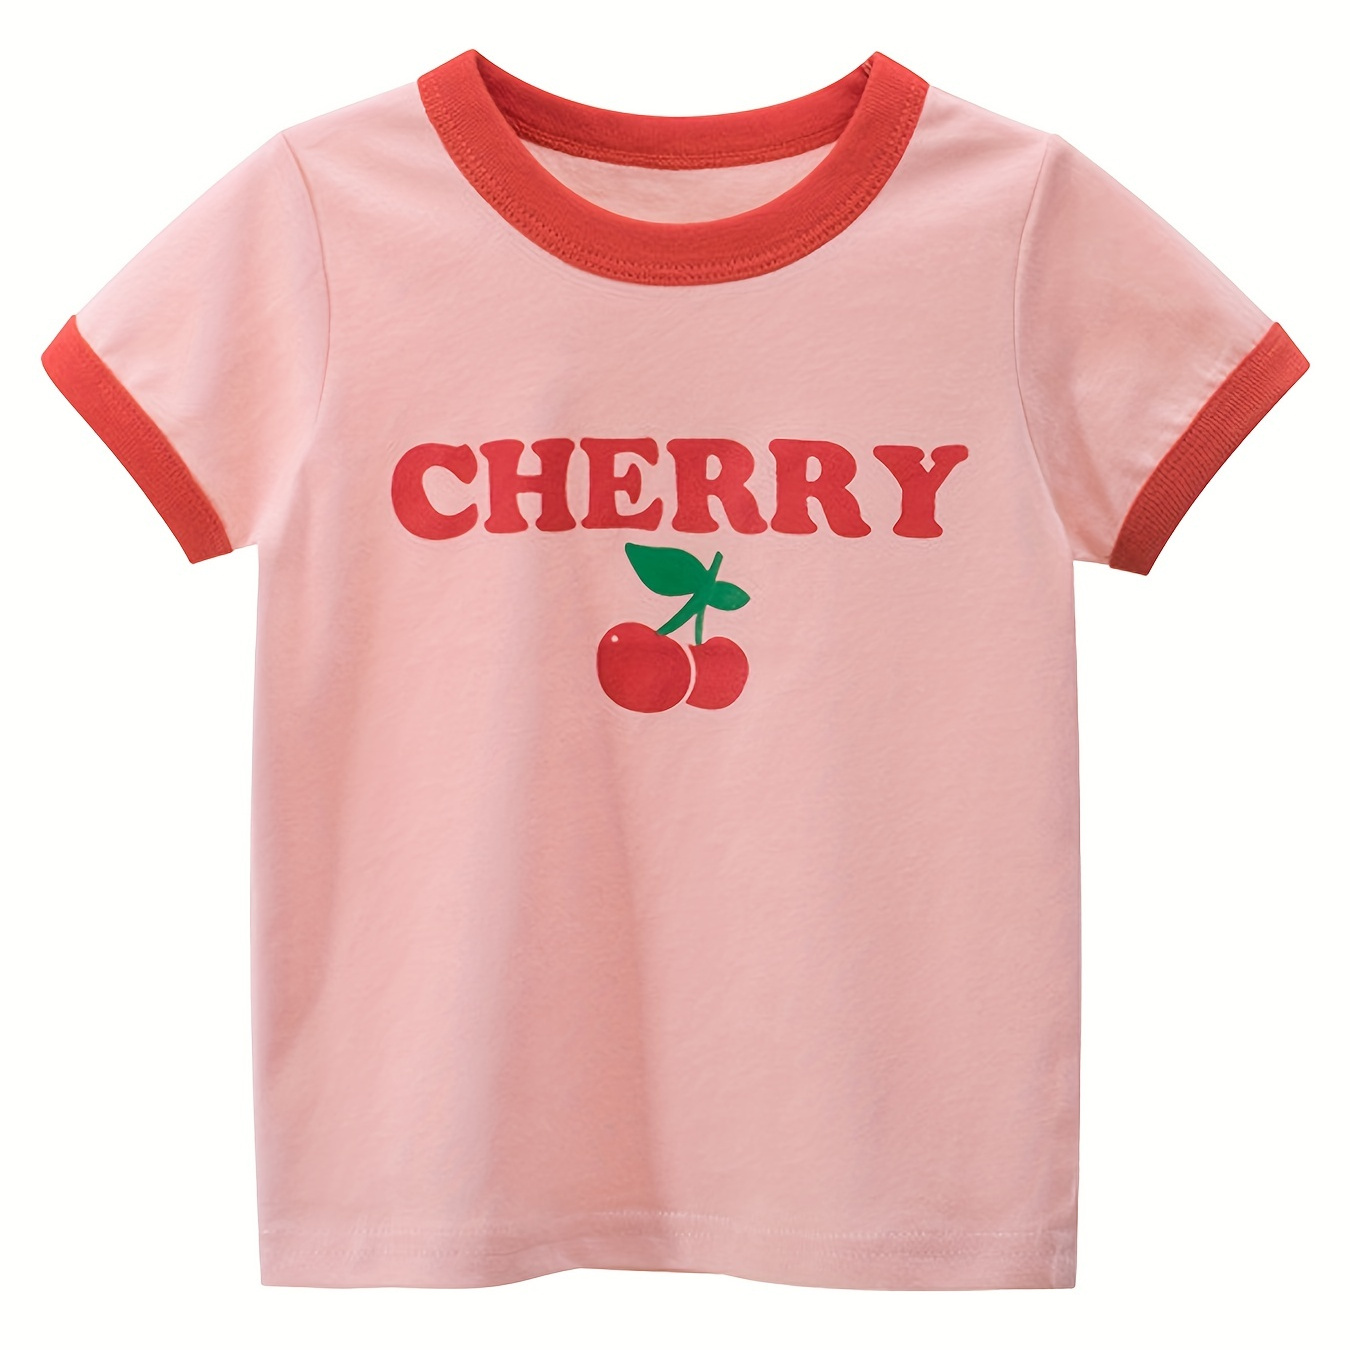 

Toddler Girls Cherry Graphic Contrast Binding T-shirt Cotton Casual Round Neck Tees Top Kids Summer Clothes